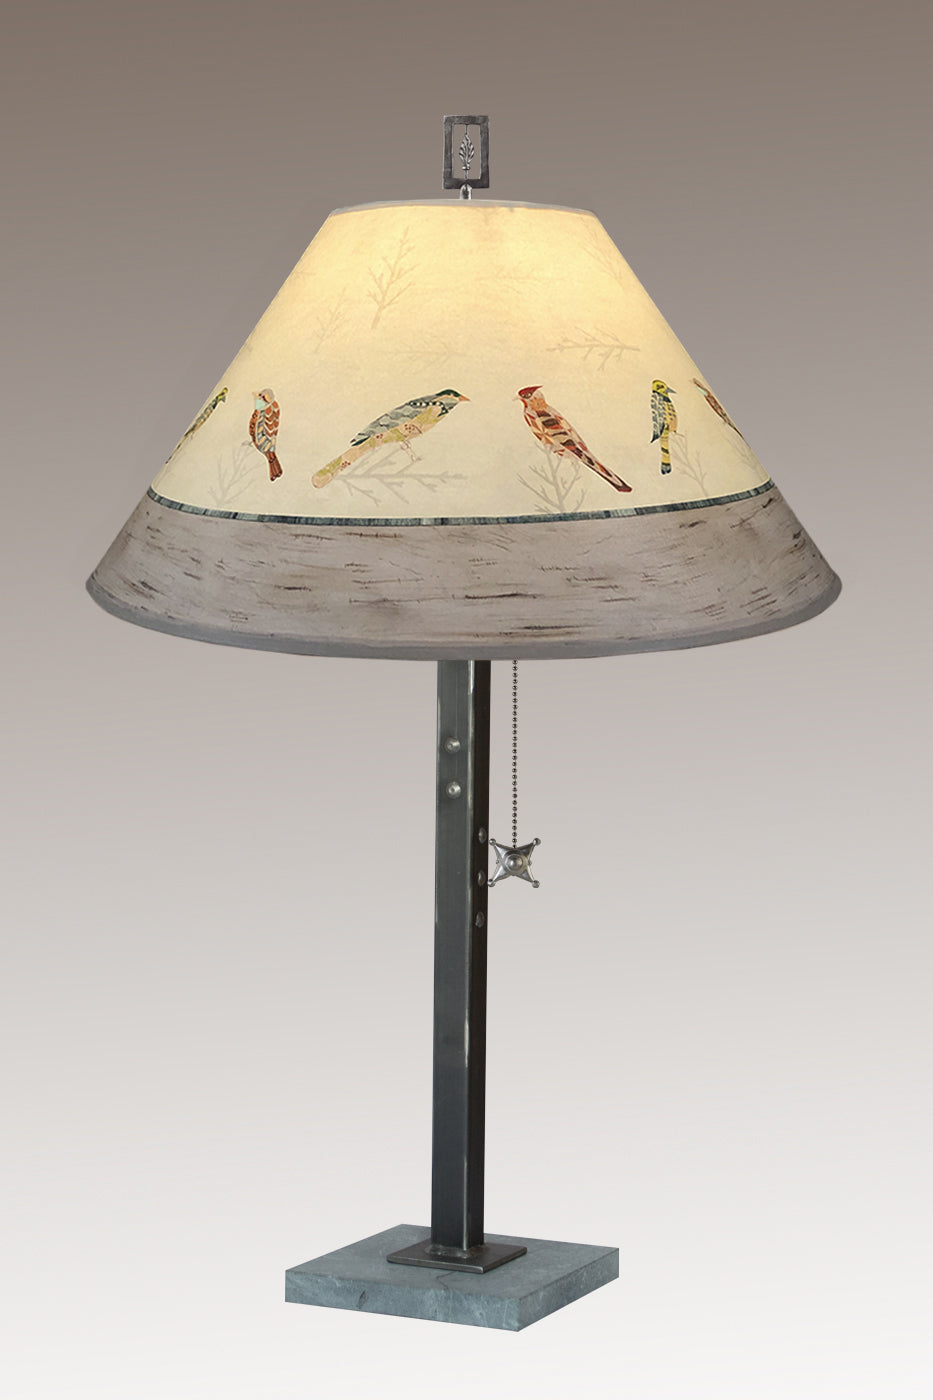 Steel Table Lamp with Large Conical Shade in Bird Friends